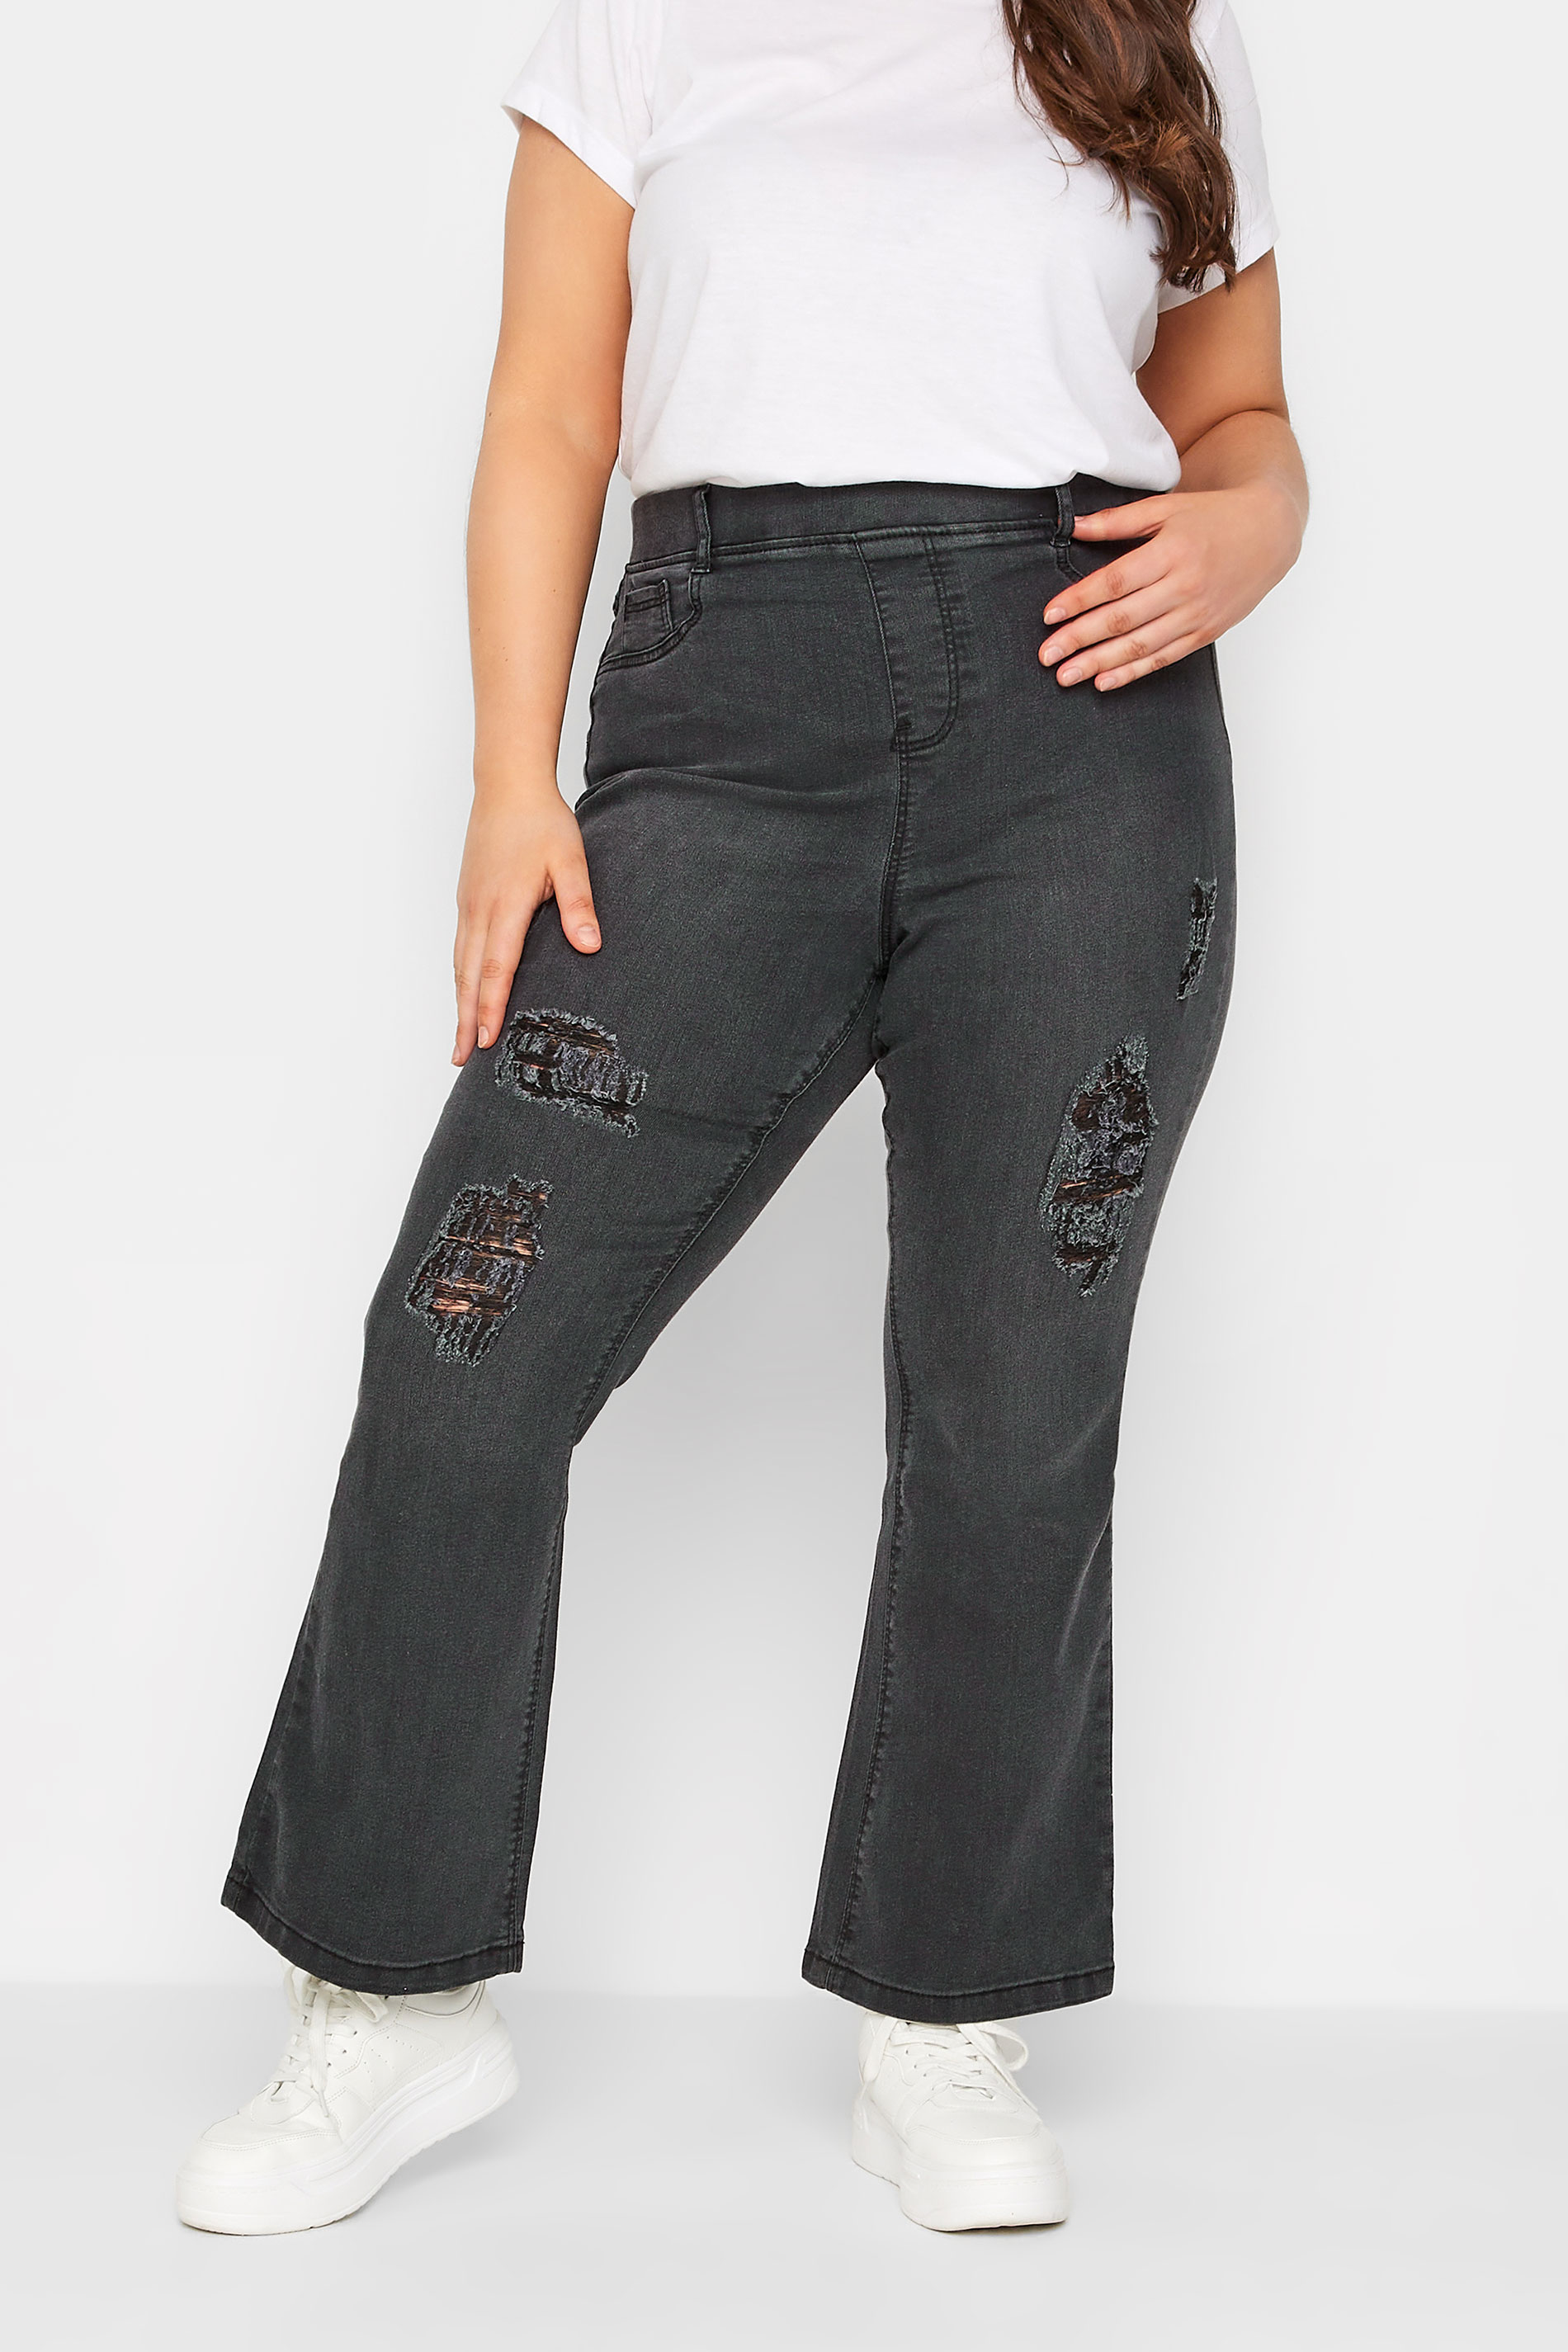 DG2 by Diane Gilman New Classic Stretch Pull-On Utility Bootcut